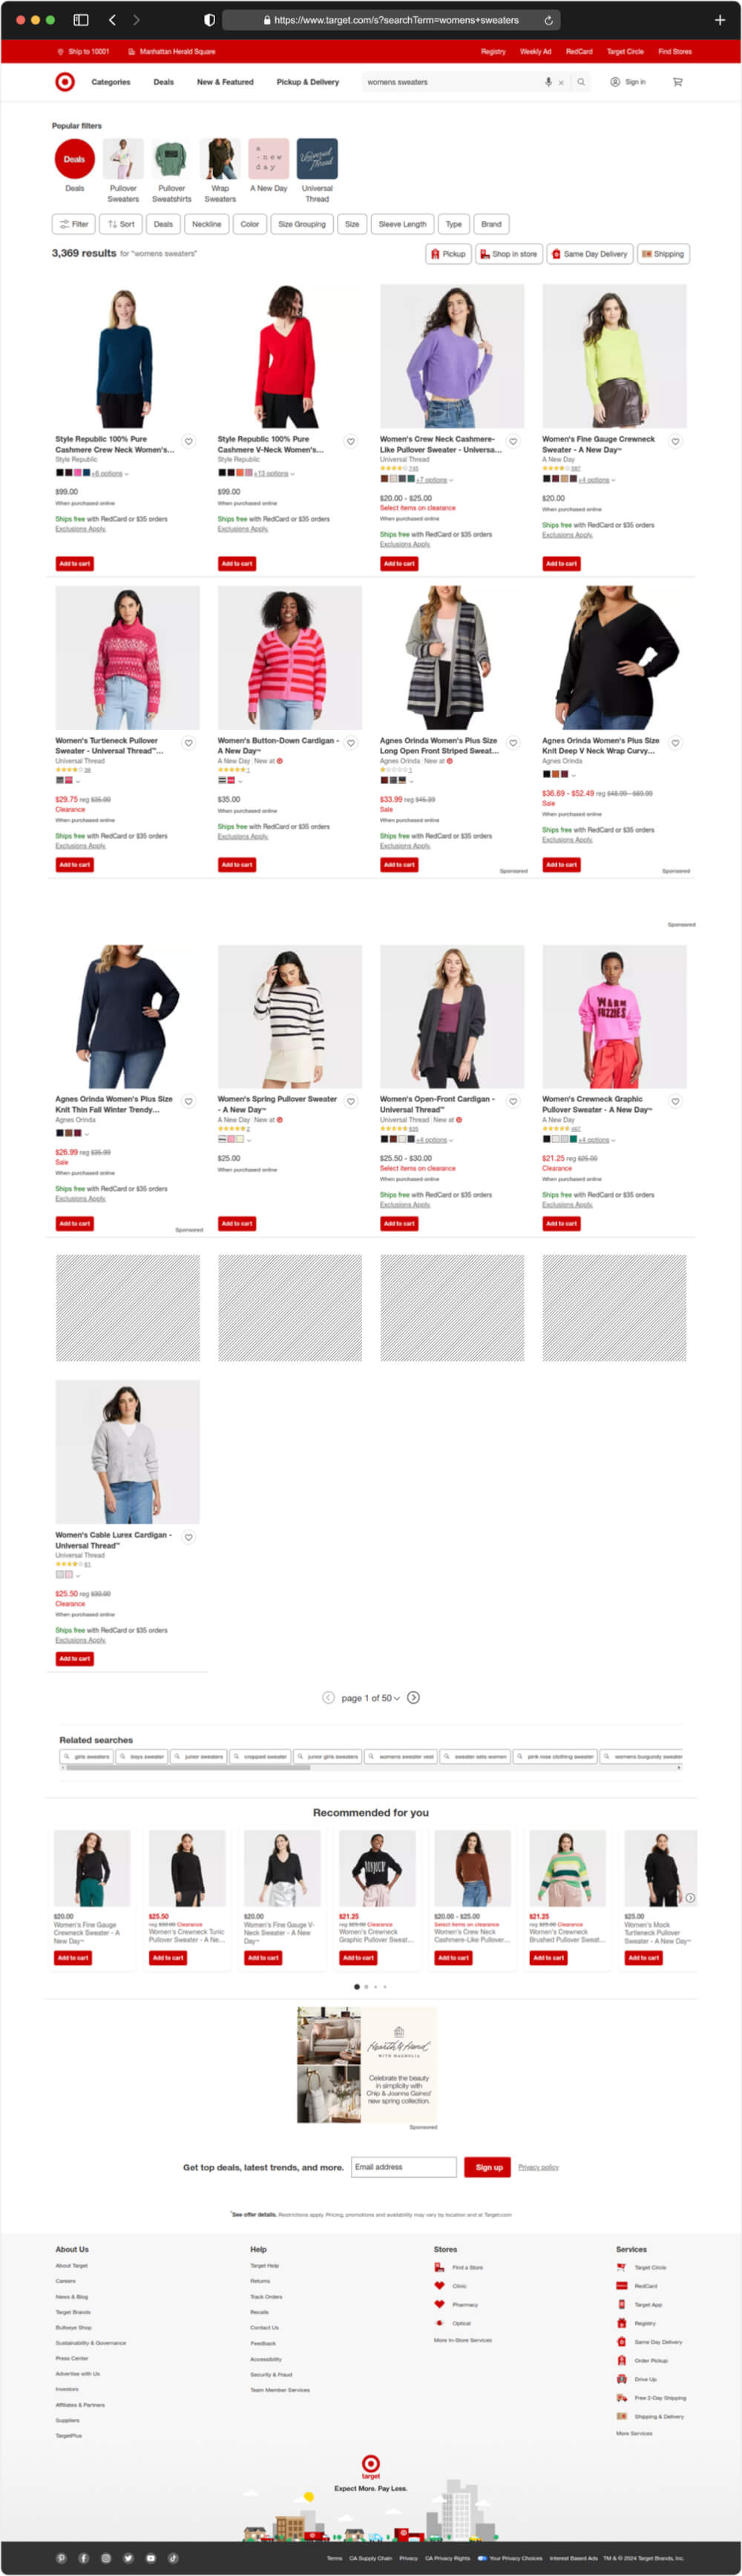 Target Search Page